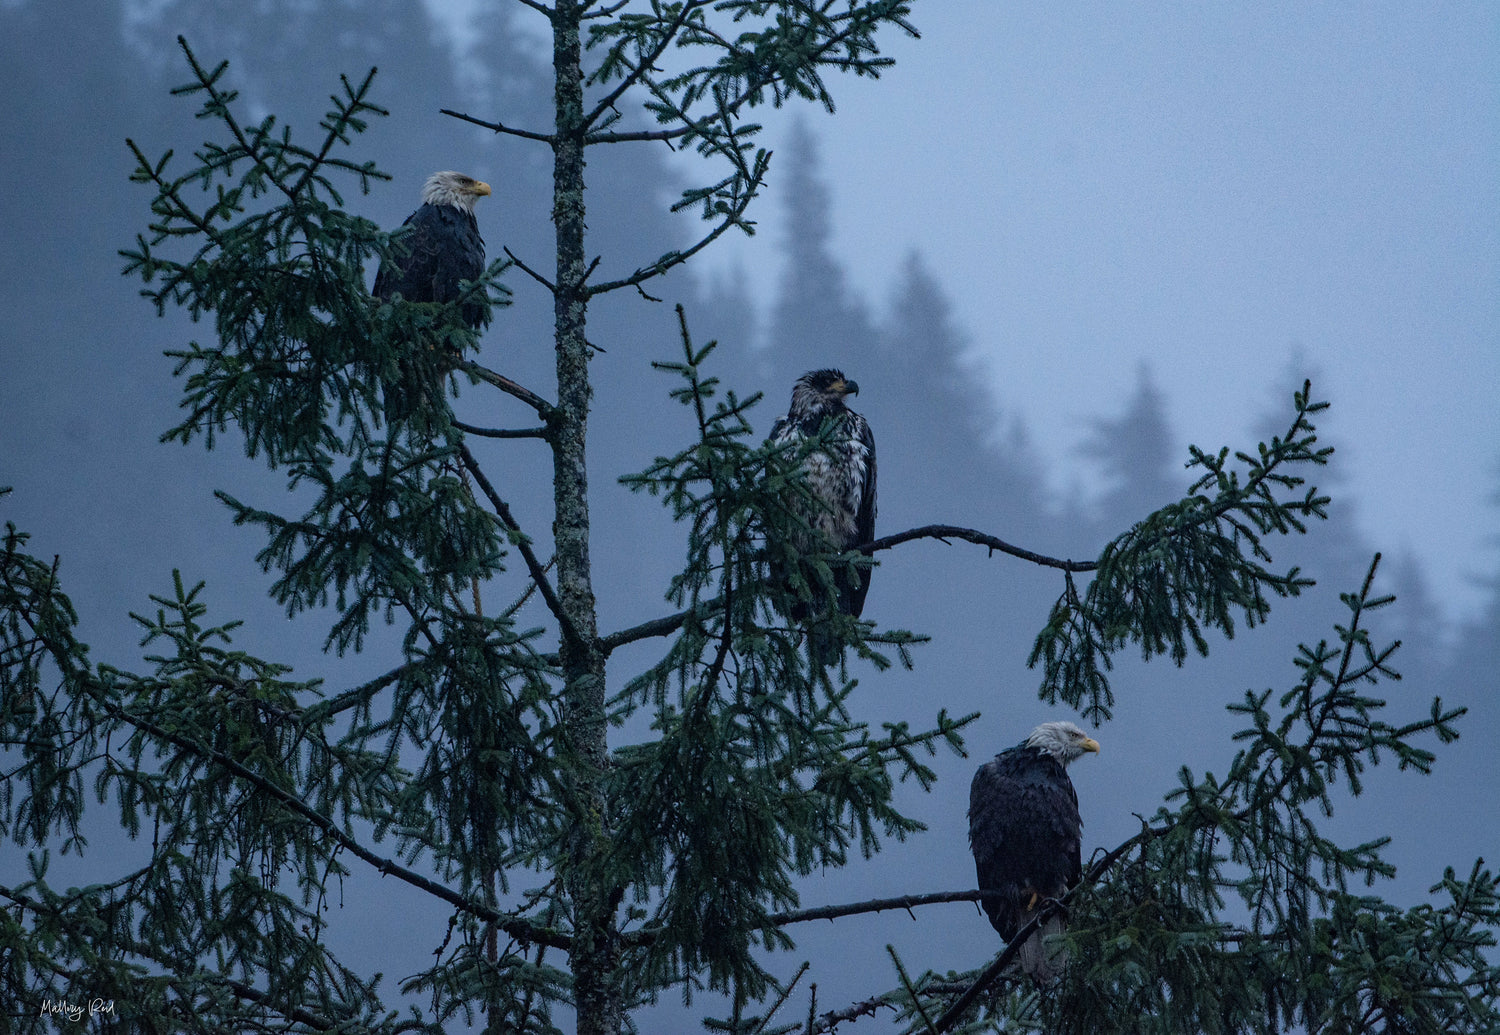 A picture of three bald eagles sitting in a tree